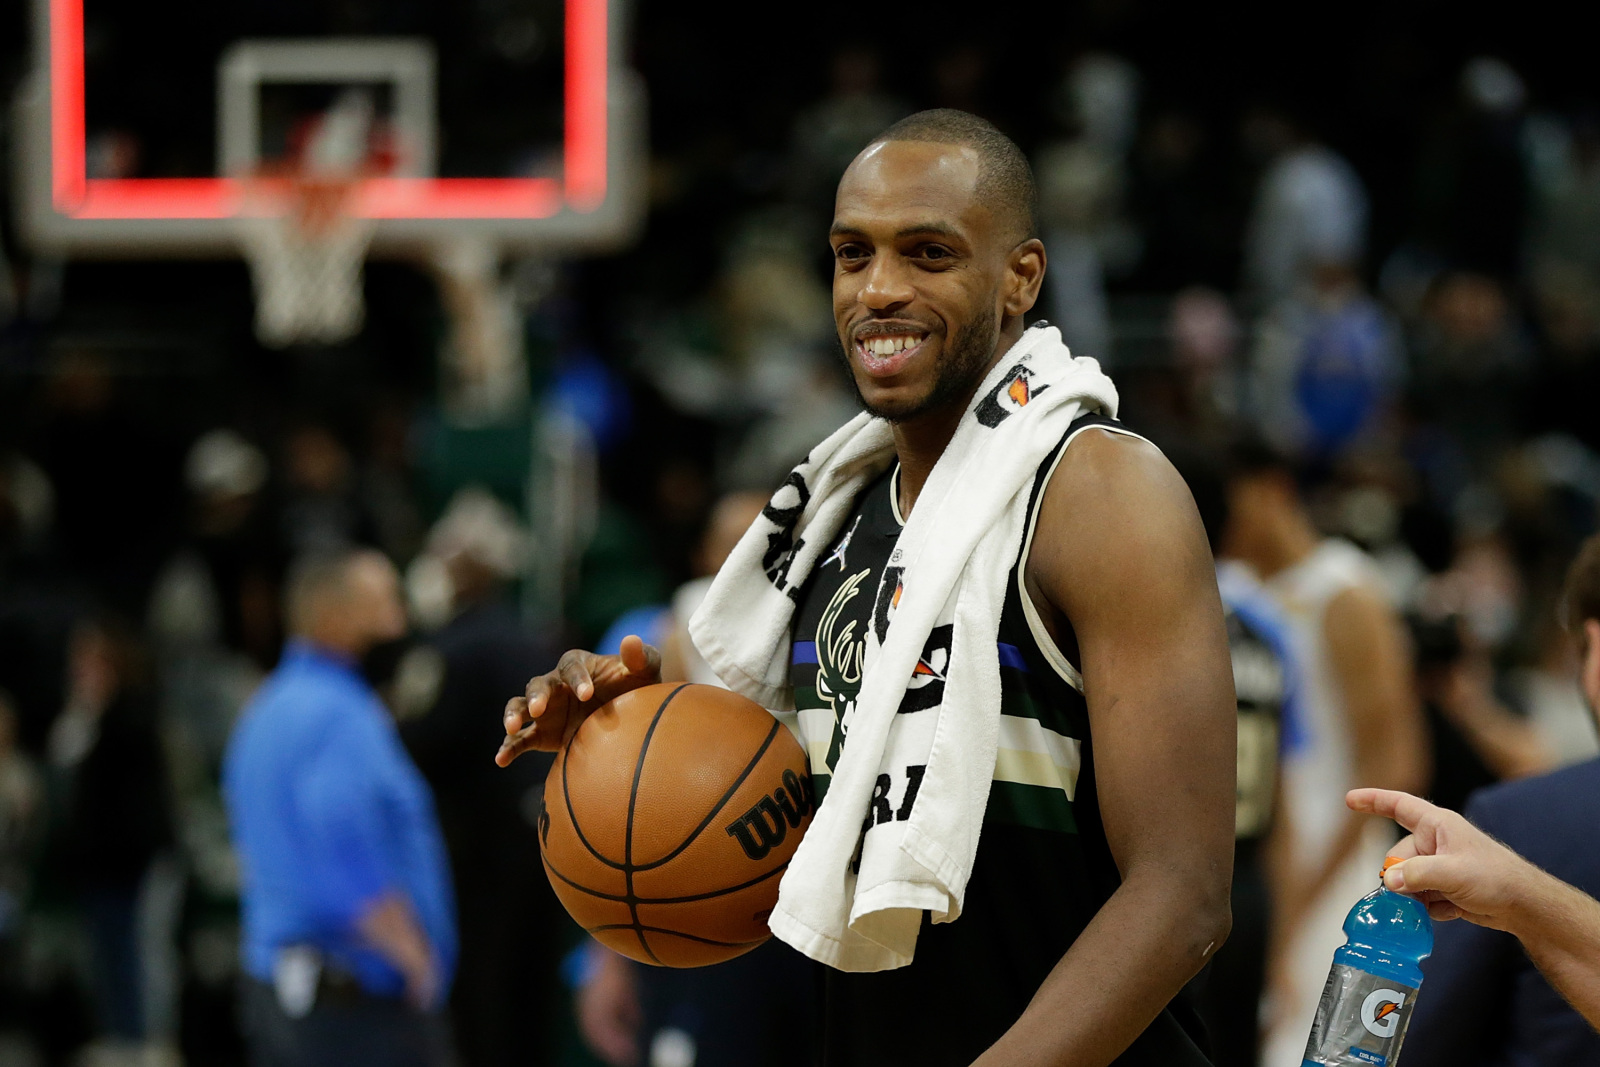 Khris Middleton Selected to 2019 NBA All-Star Game